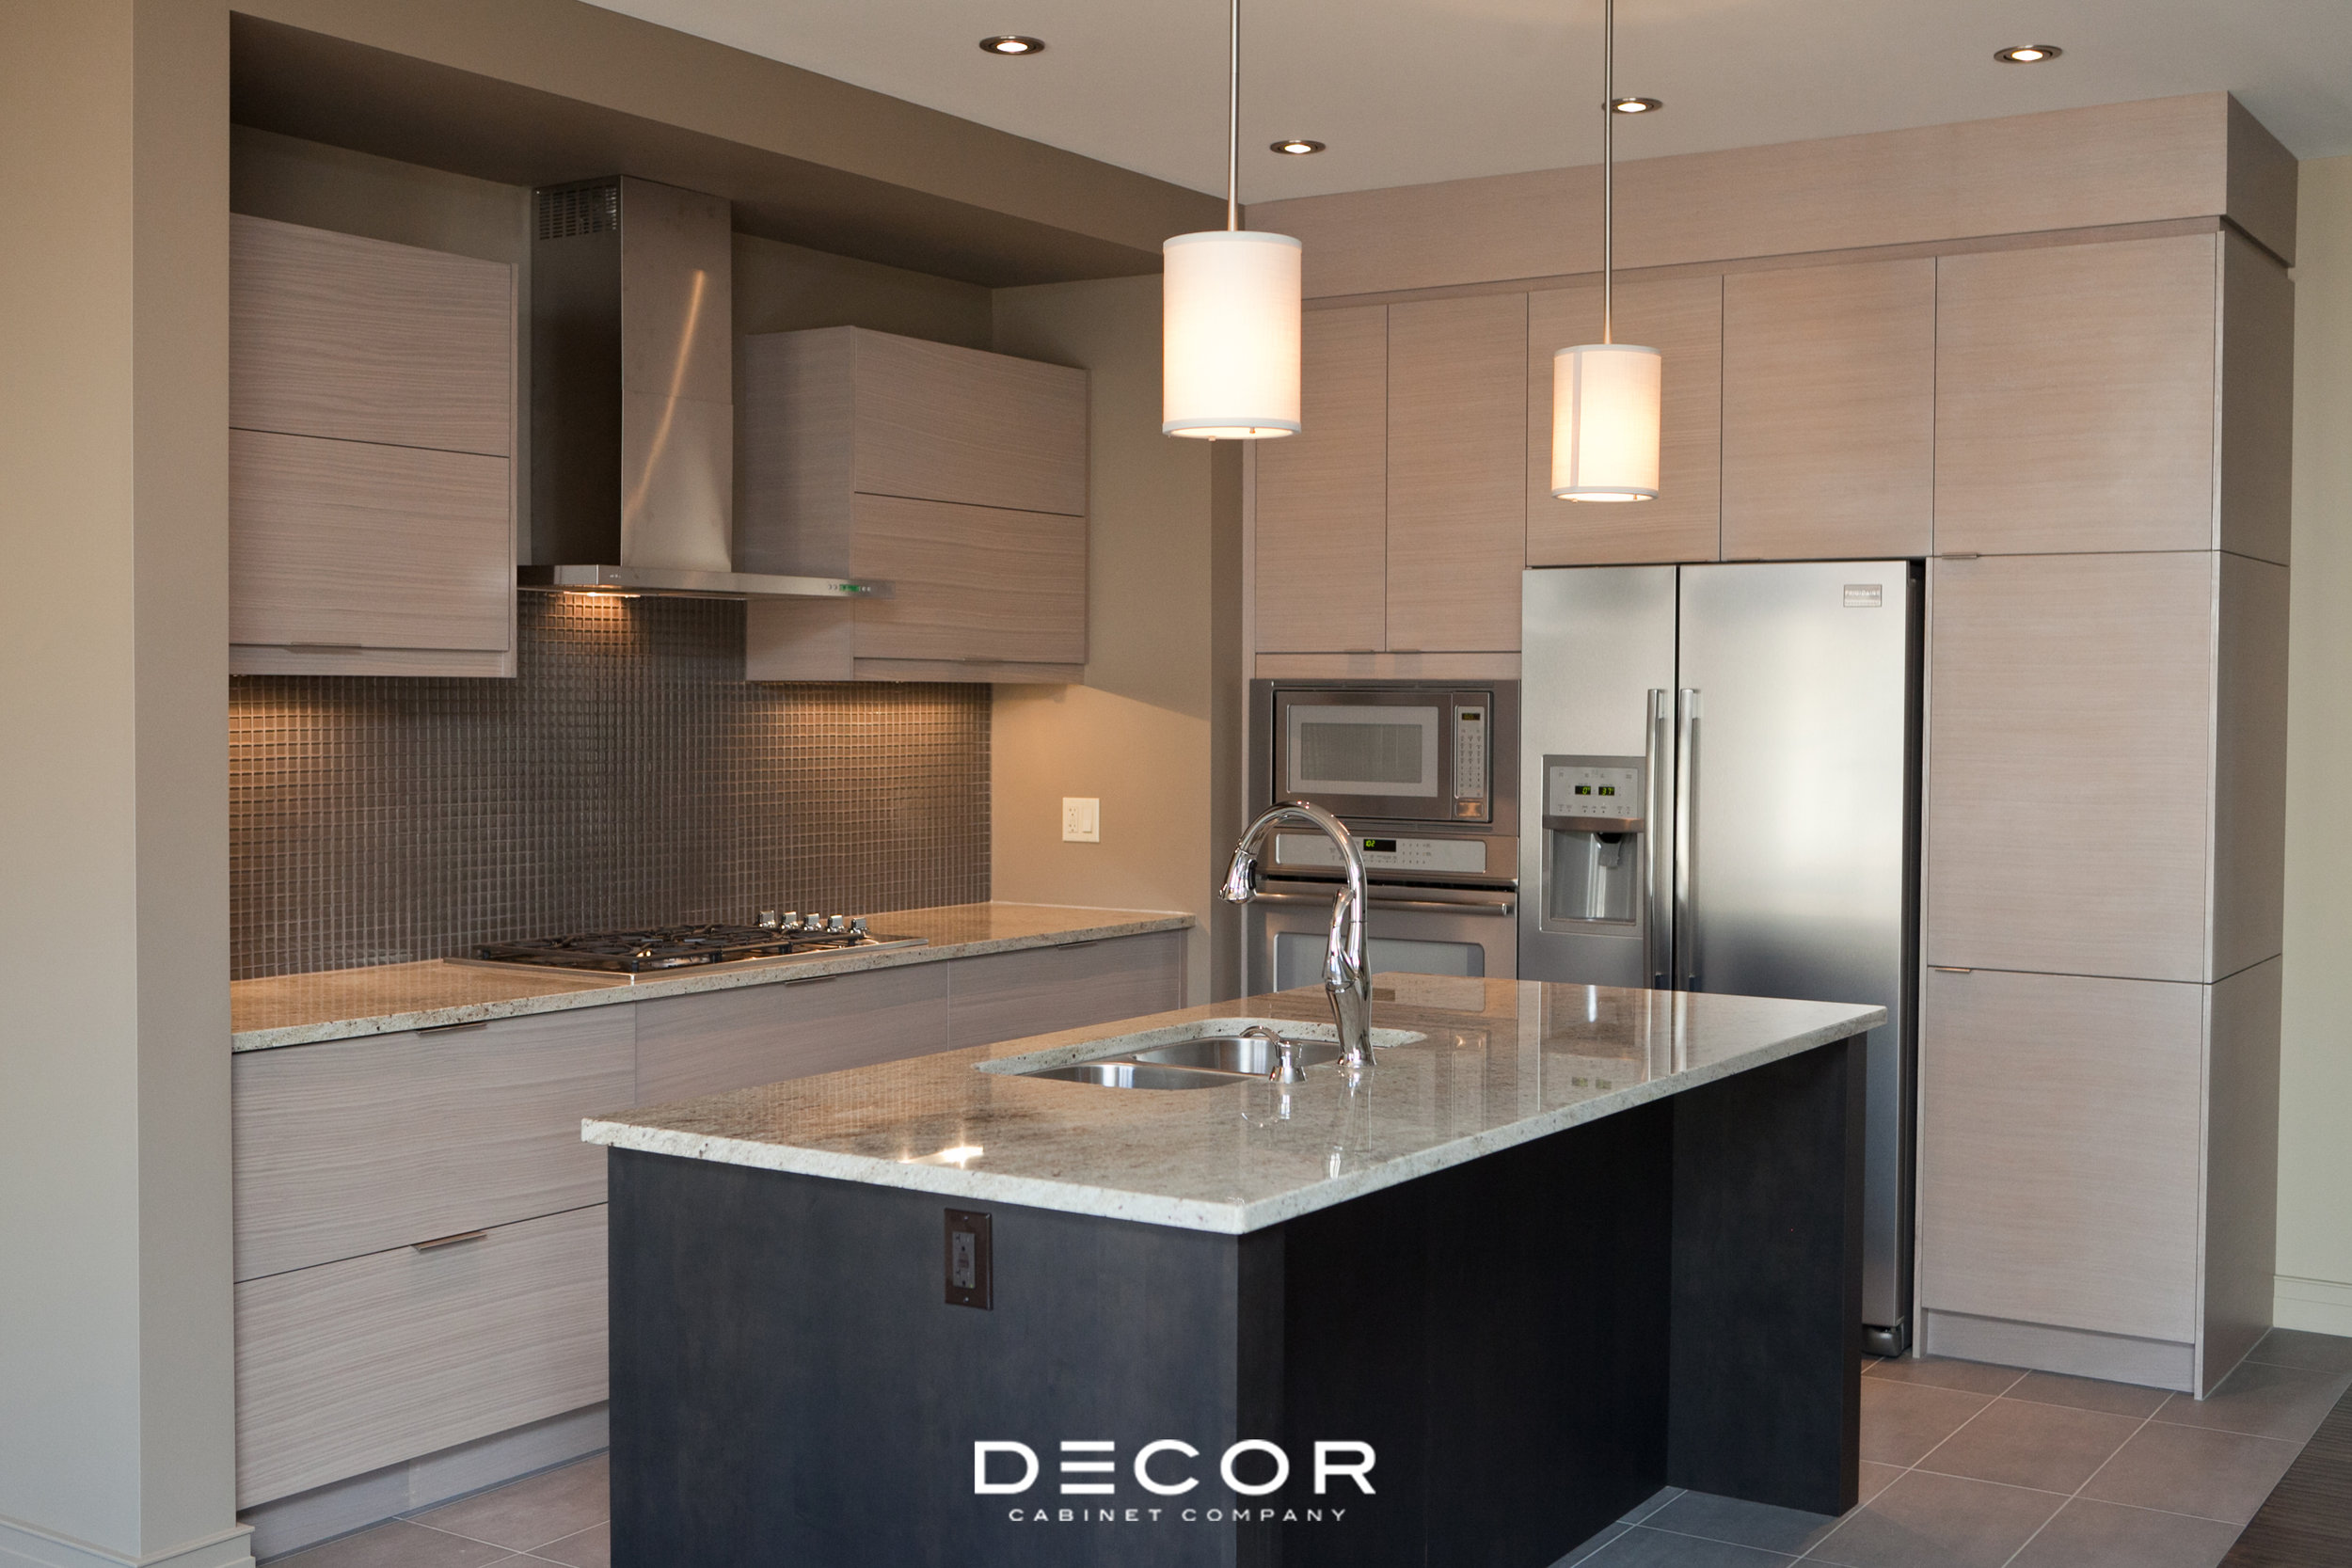 Decor Cabinet Company Kitchens By Lenore